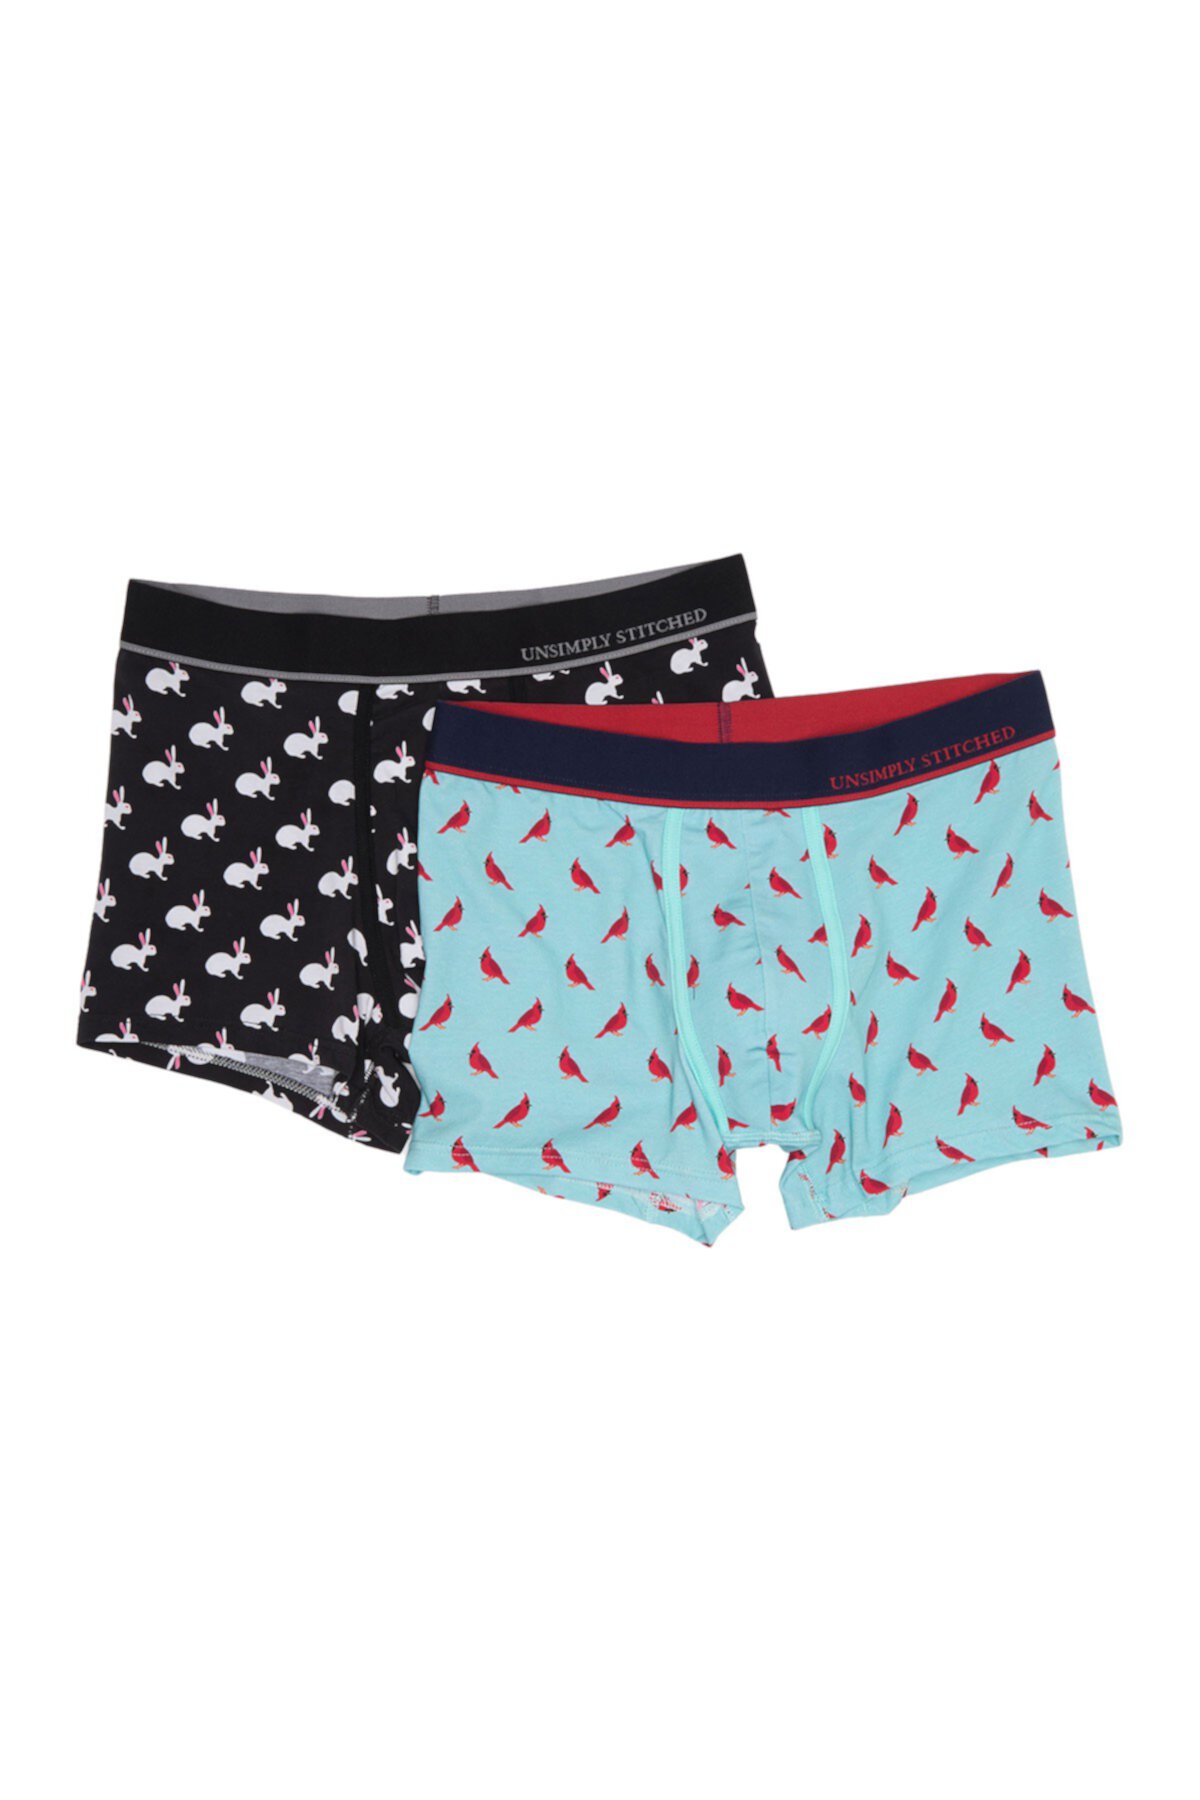 Boxer Briefs - Pack of 2 Unsimply Stitched